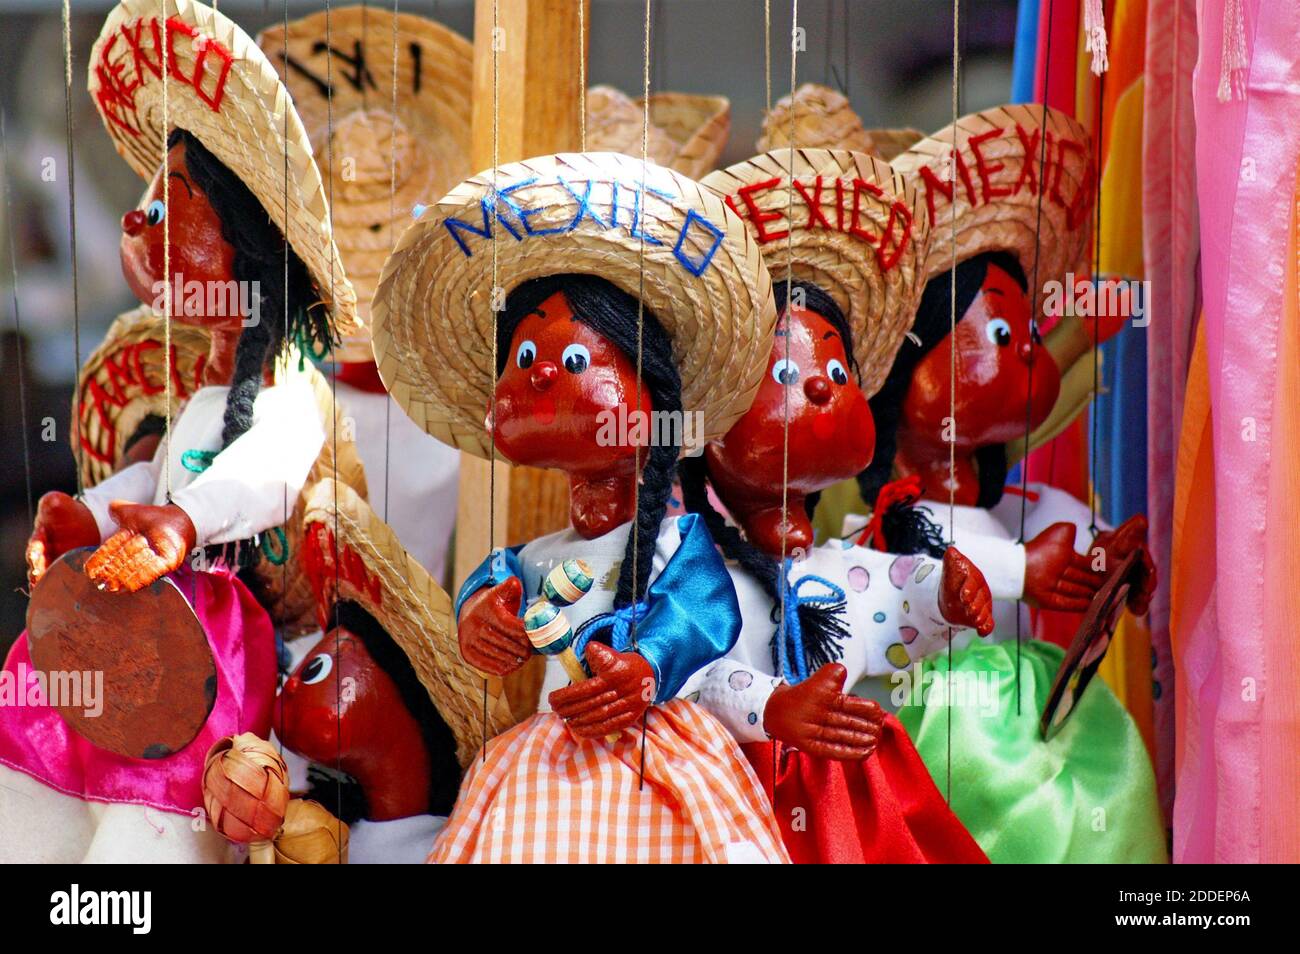 Mexican Souvenir Marionettes Hanging In A Tourist Store Are Painted And Dressed To Represent The Culture And People Exaggerating Cultural Stereotypes Like The Marionettes Is Offensive To Many Which Brings To Question